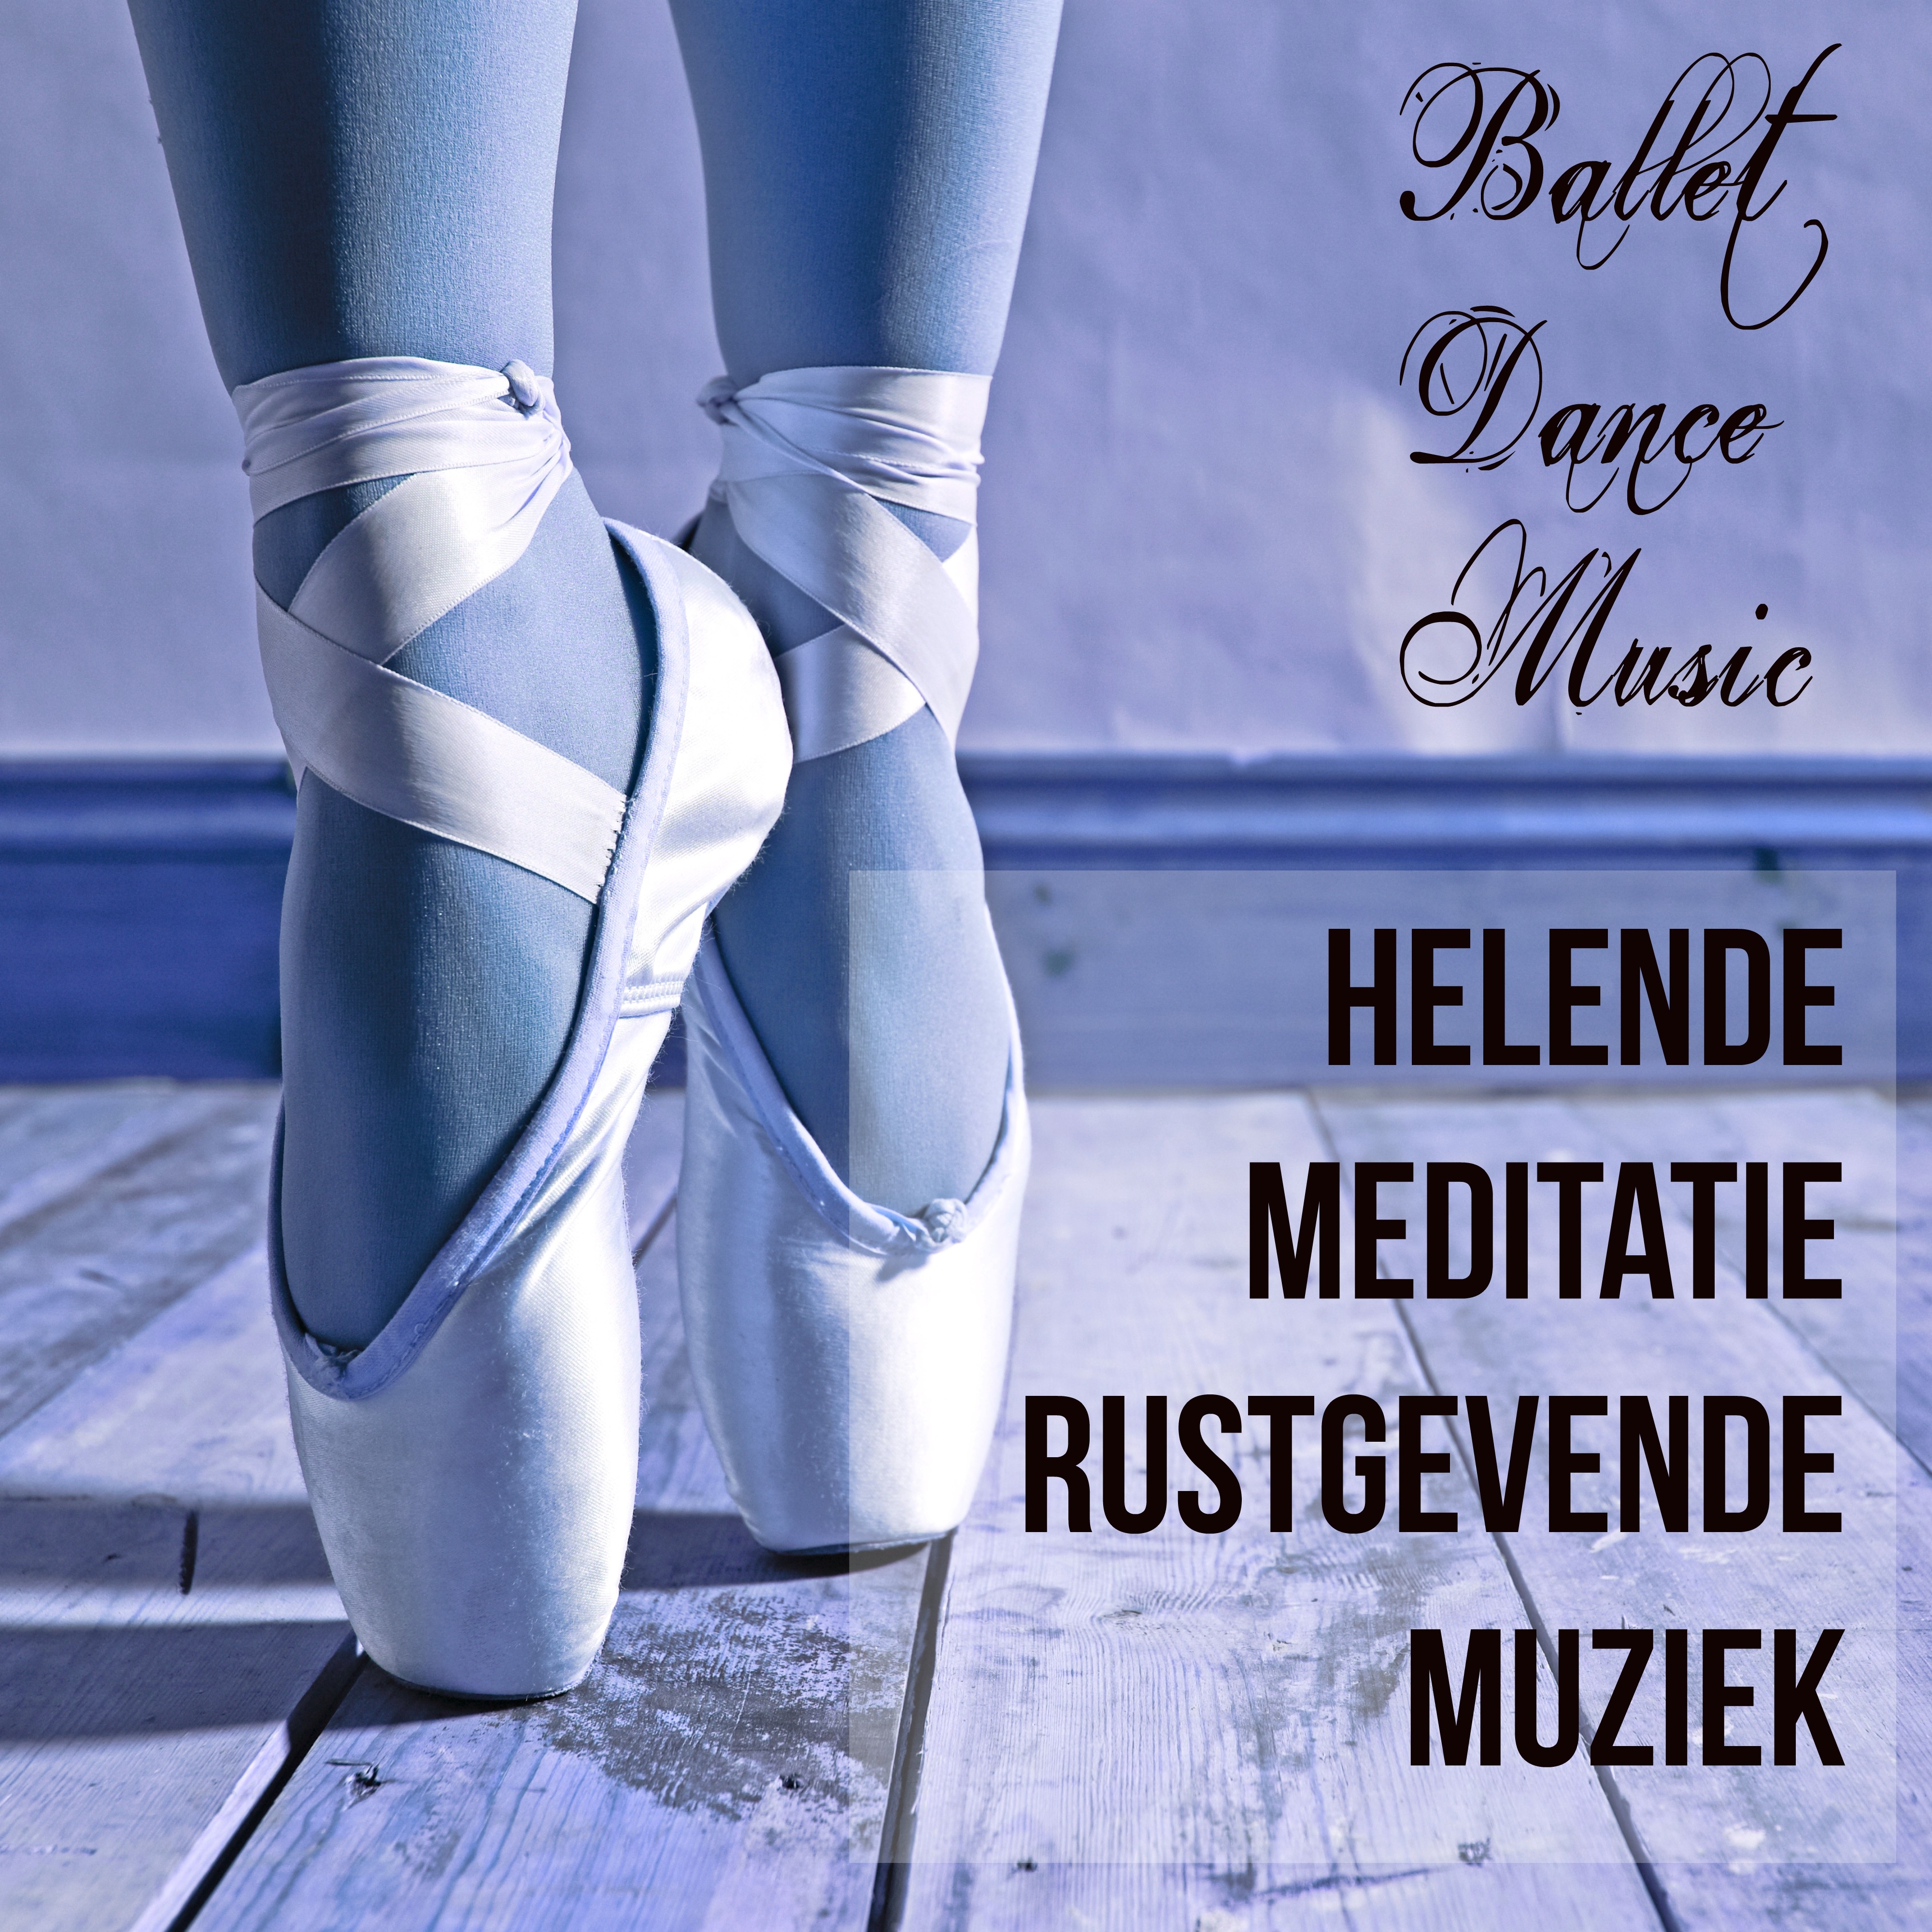 Mazurka in A Minor, Op. 68, No. 2 8Classical Piano Music for Ballet)